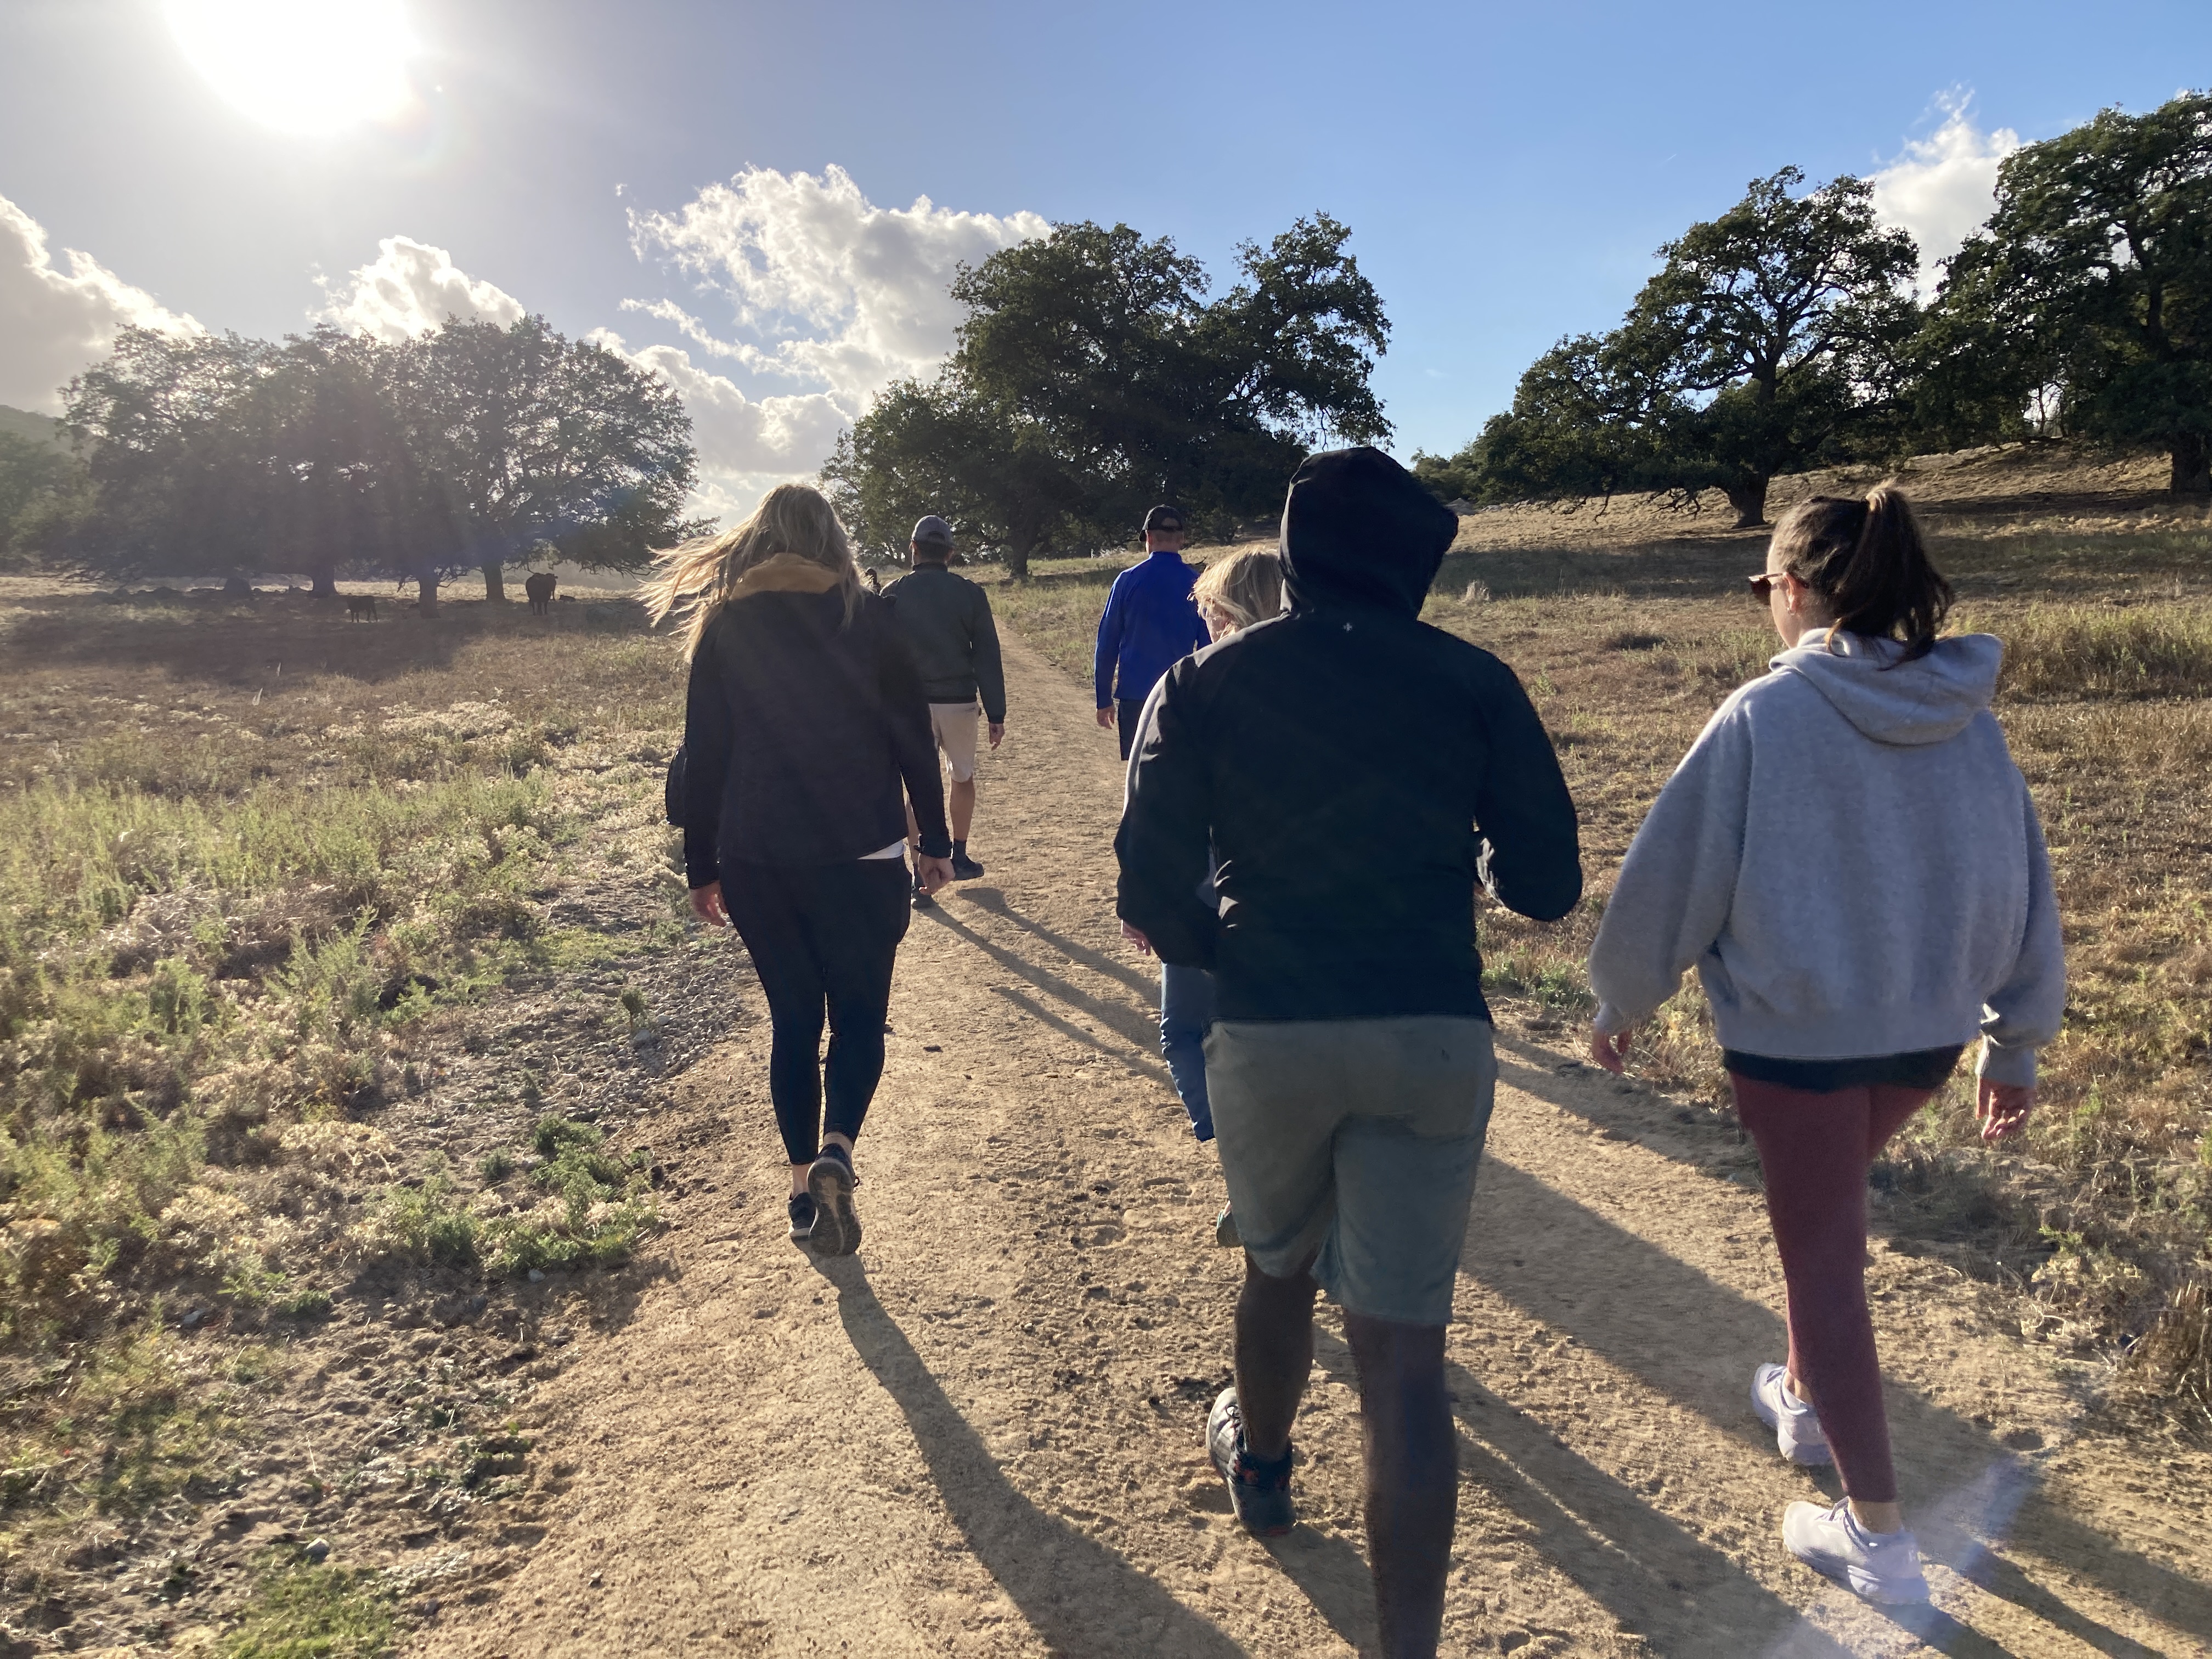 group of people walking on dirt path